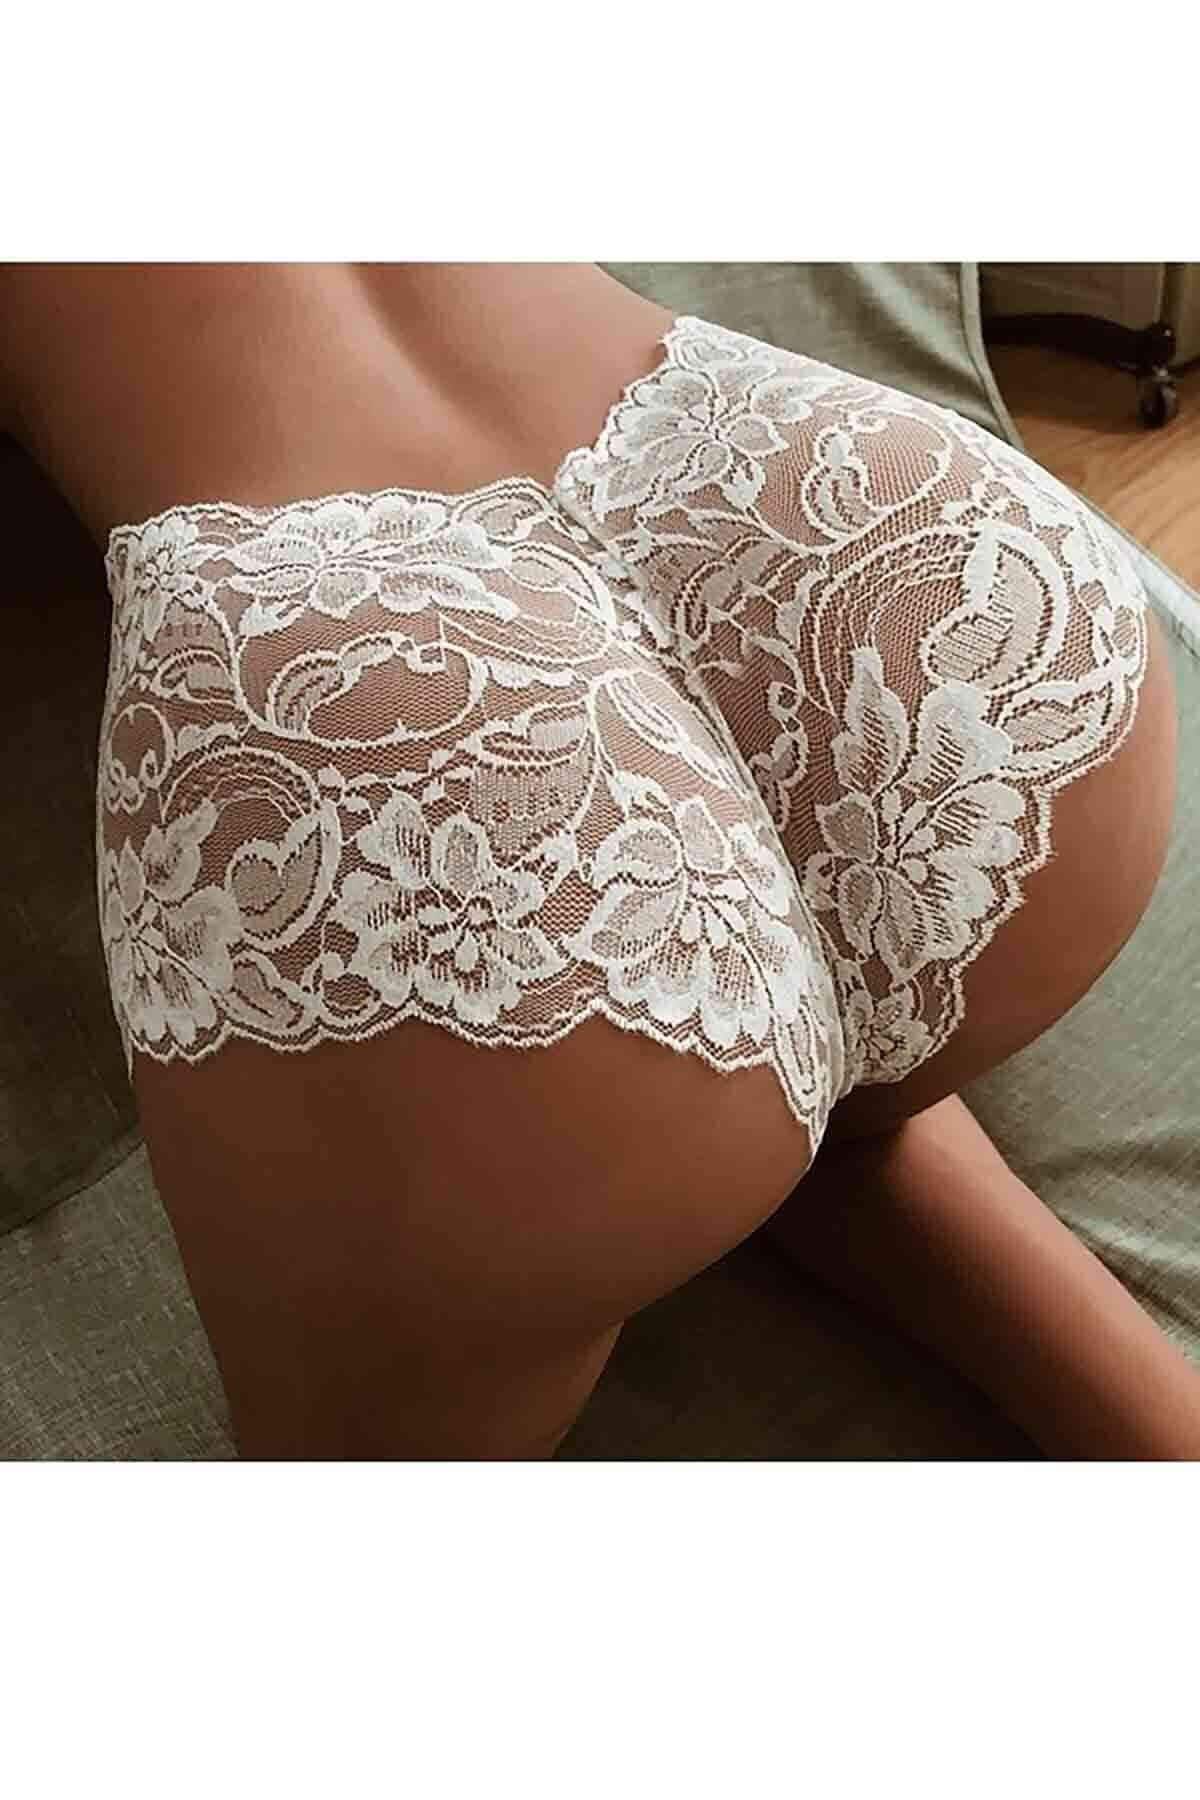 ann covell recommends big booty milfs in panties pics pic